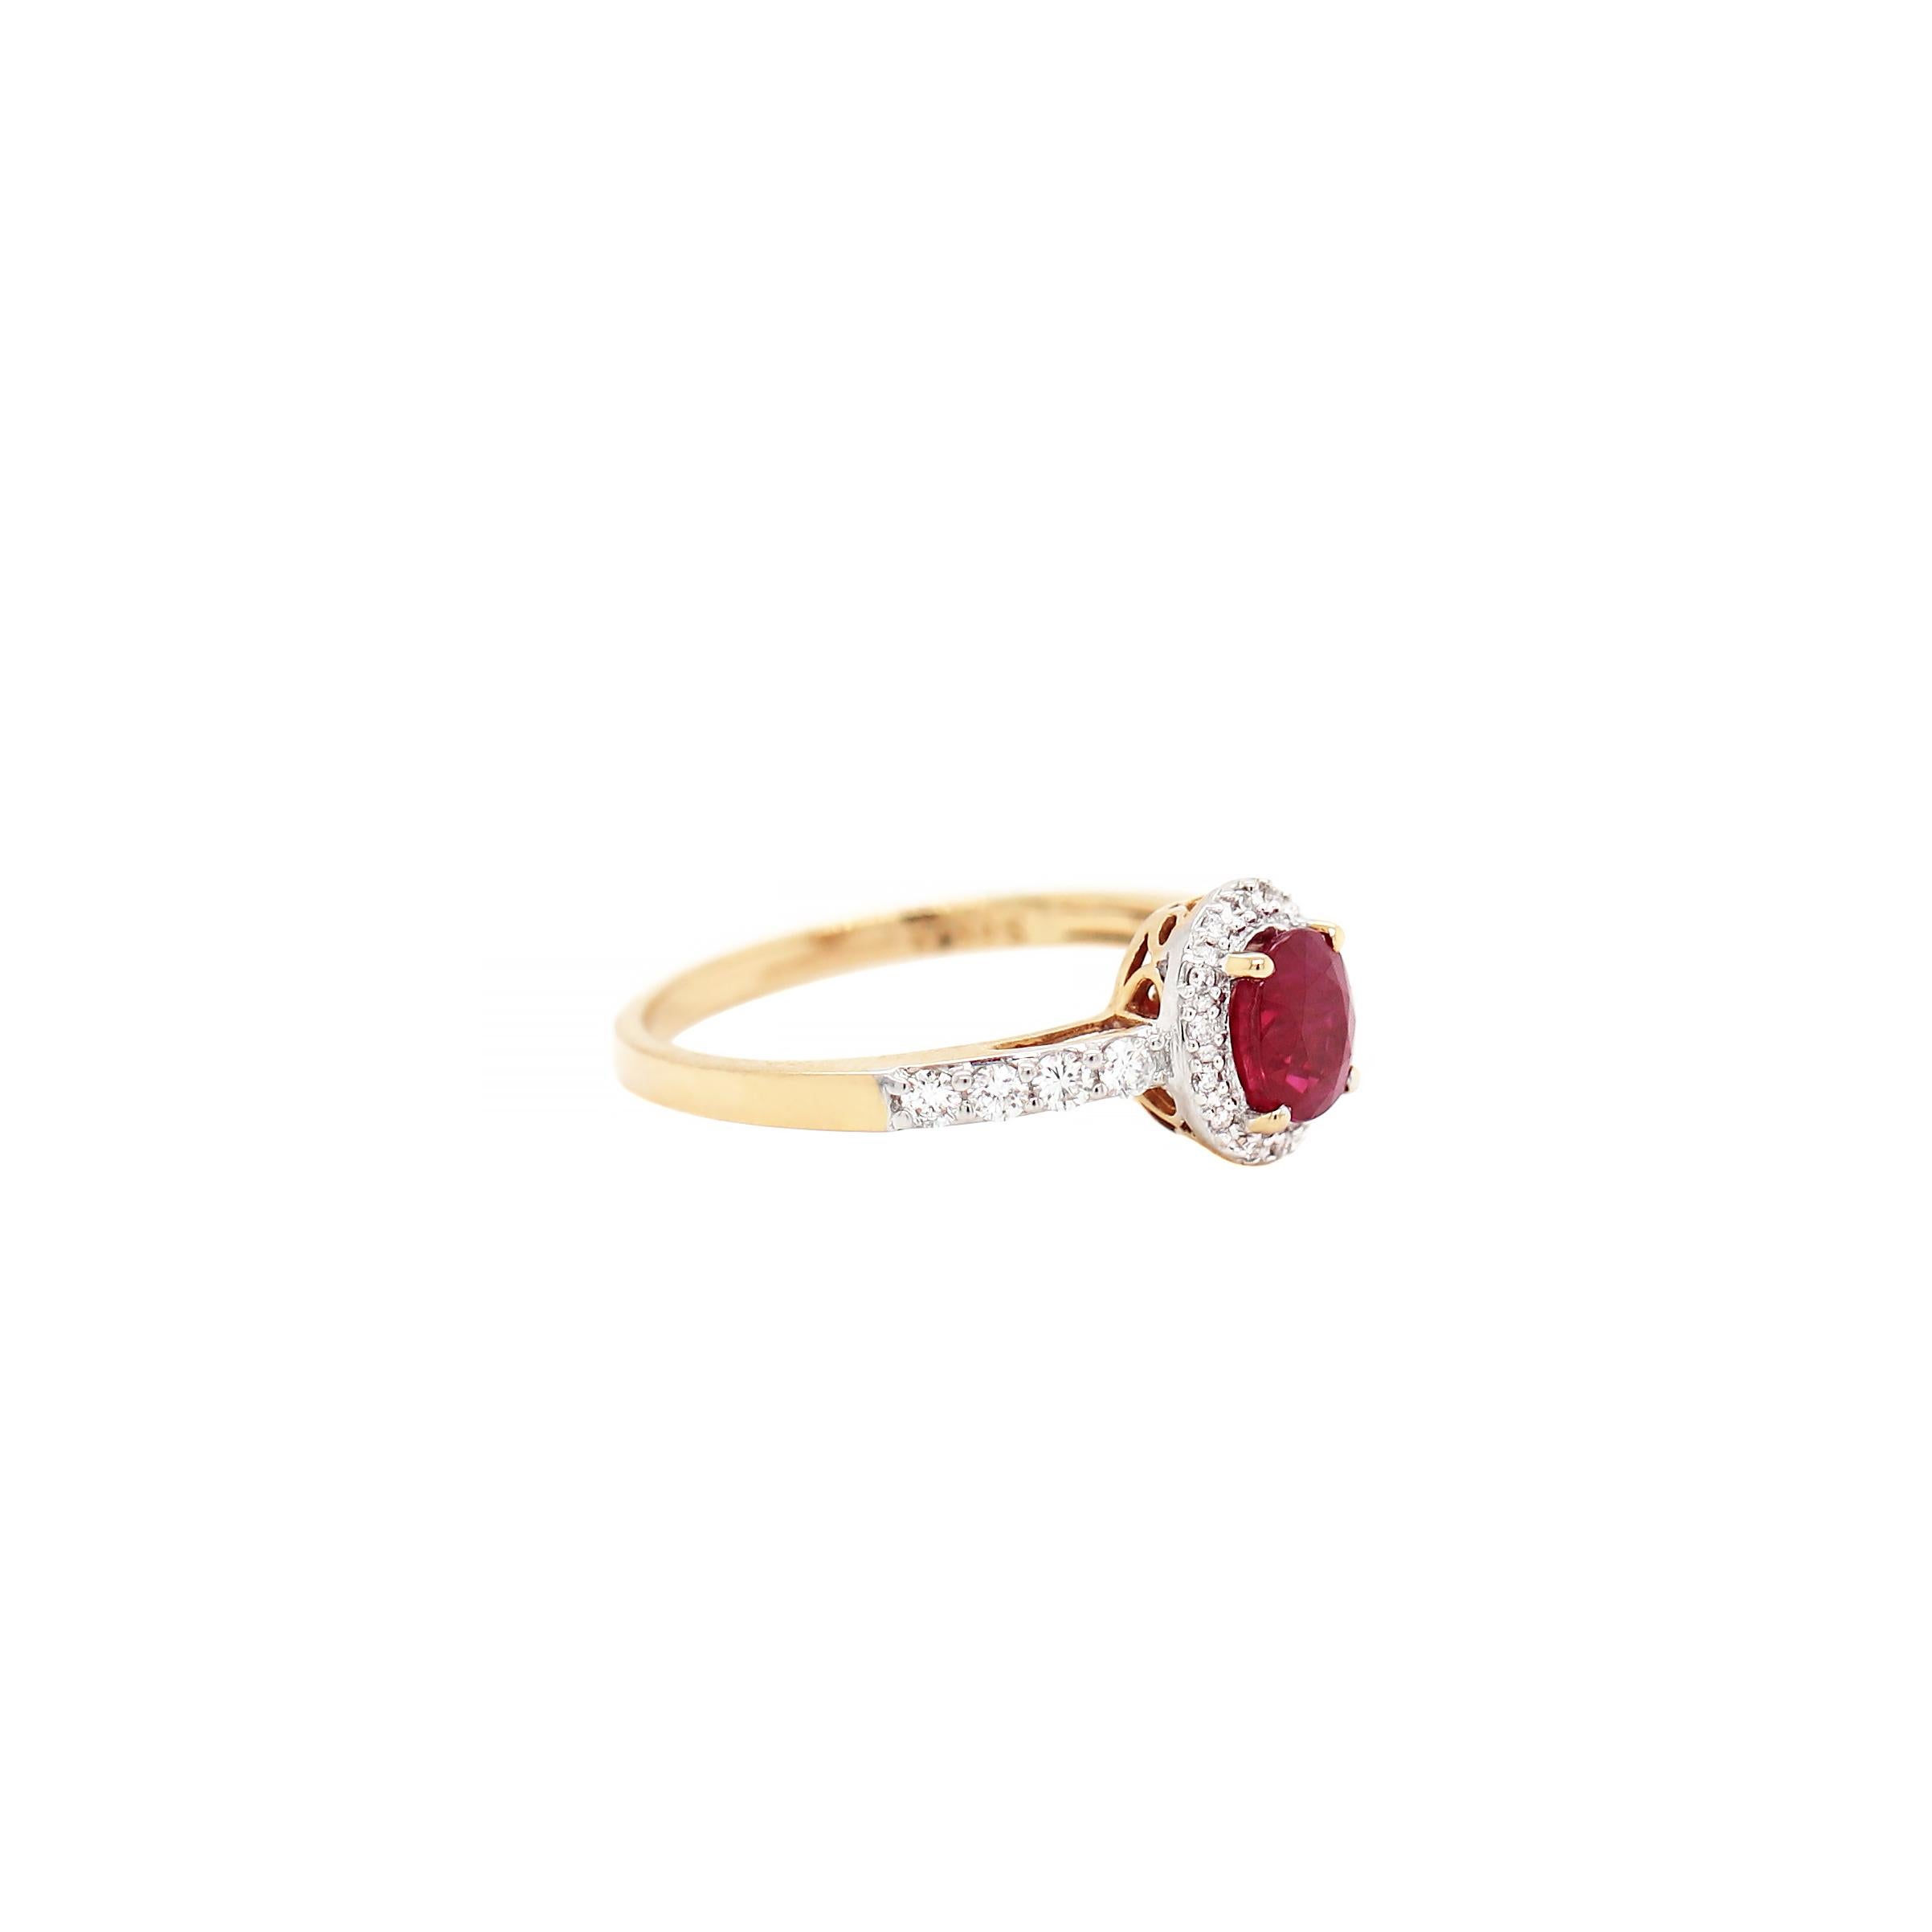 This beautiful ring features a vibrant oval shaped ruby weighing 1.02ct in a yellow gold four claw open back setting, surrounded by 24 fine quality round brilliant cut diamonds. The ring is further set with four round brilliant cut diamonds on